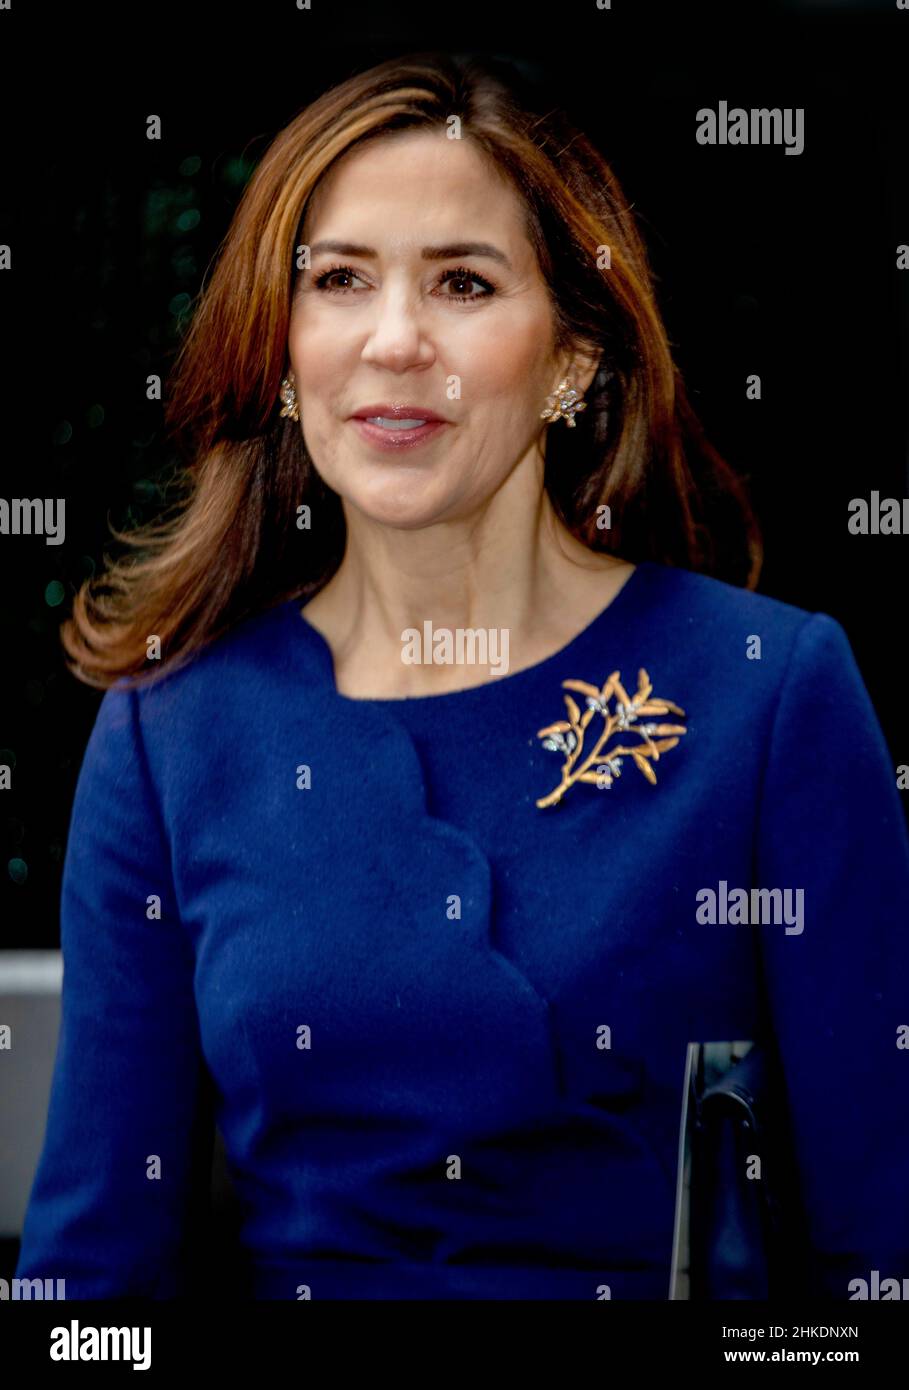 Crown Princess Mary of Denmark at the Frederiksborg Palace in